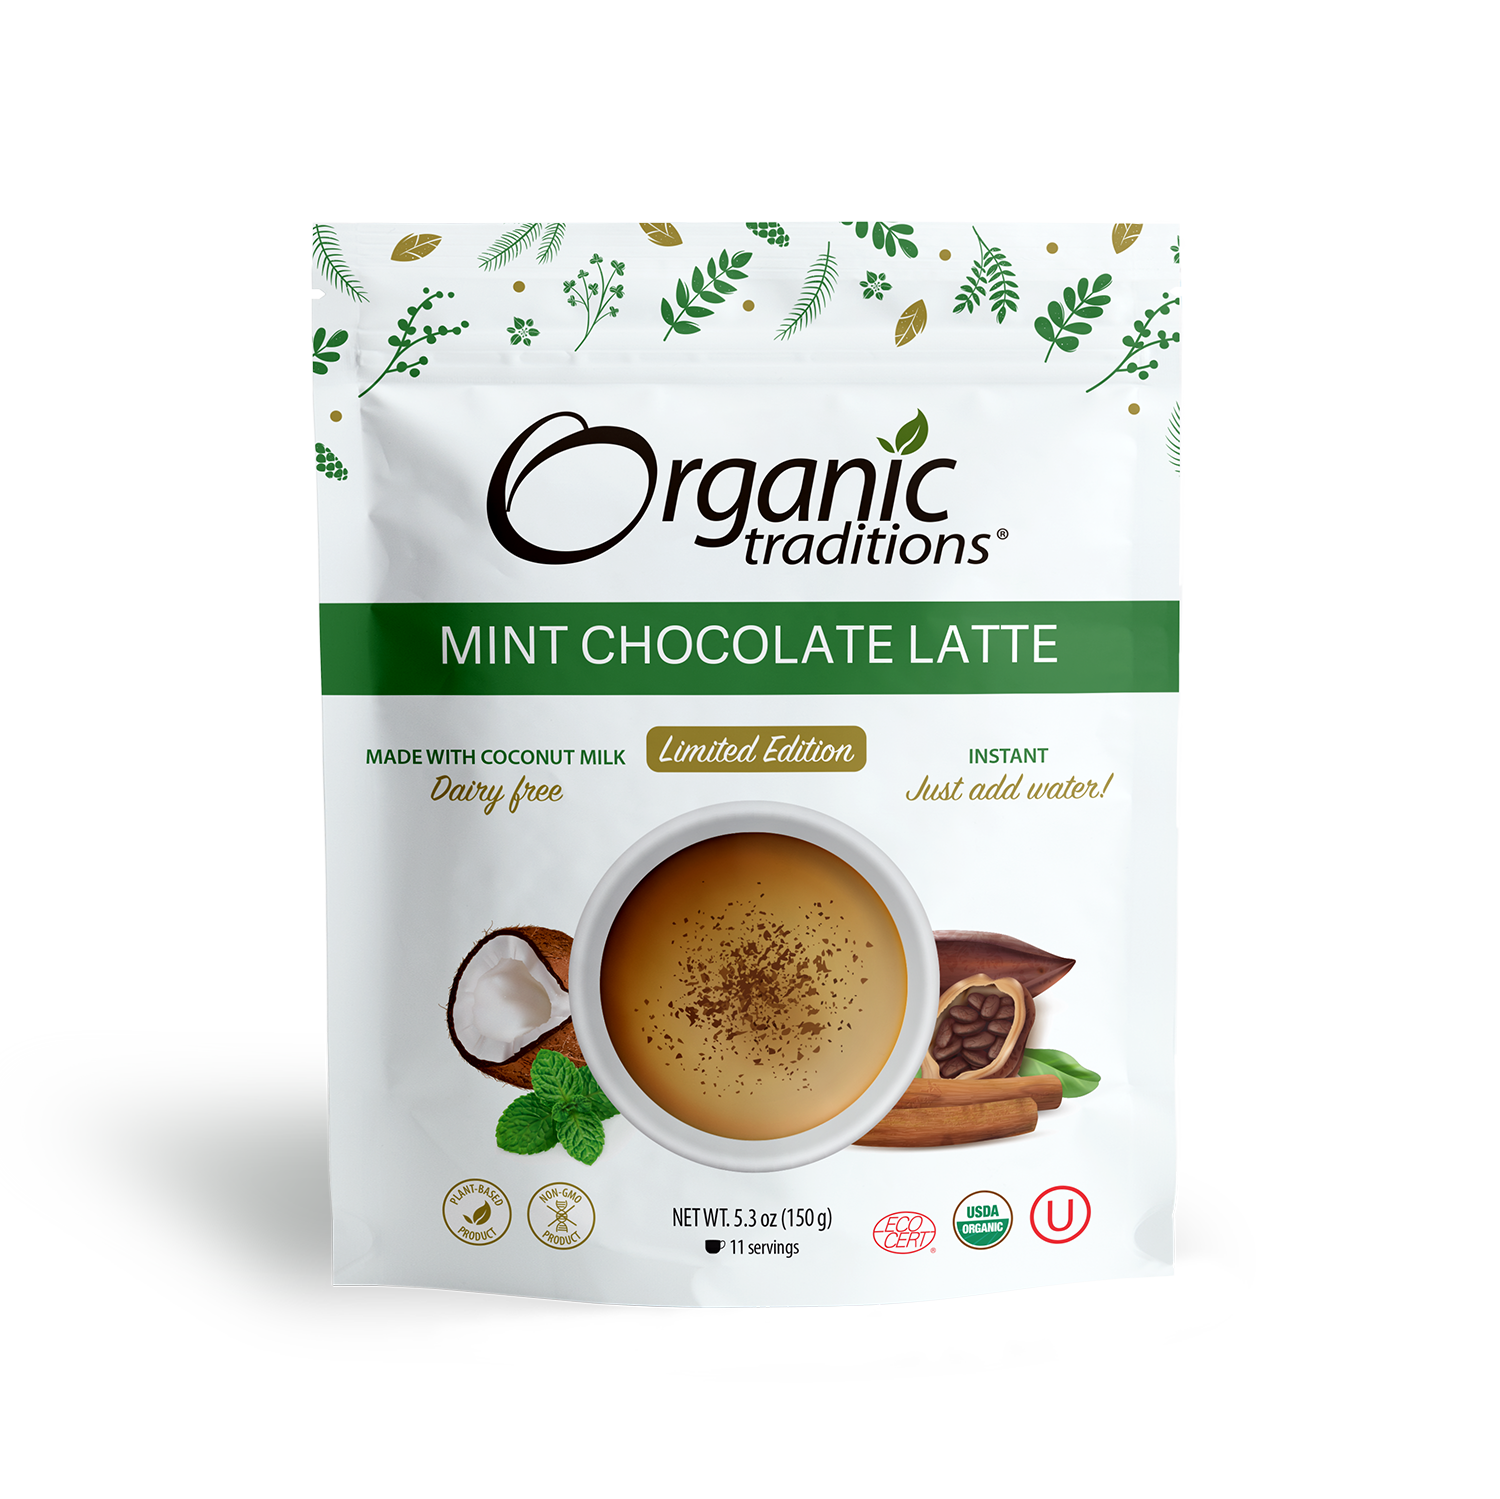 organic traditions mint chocolate latte front of bag image